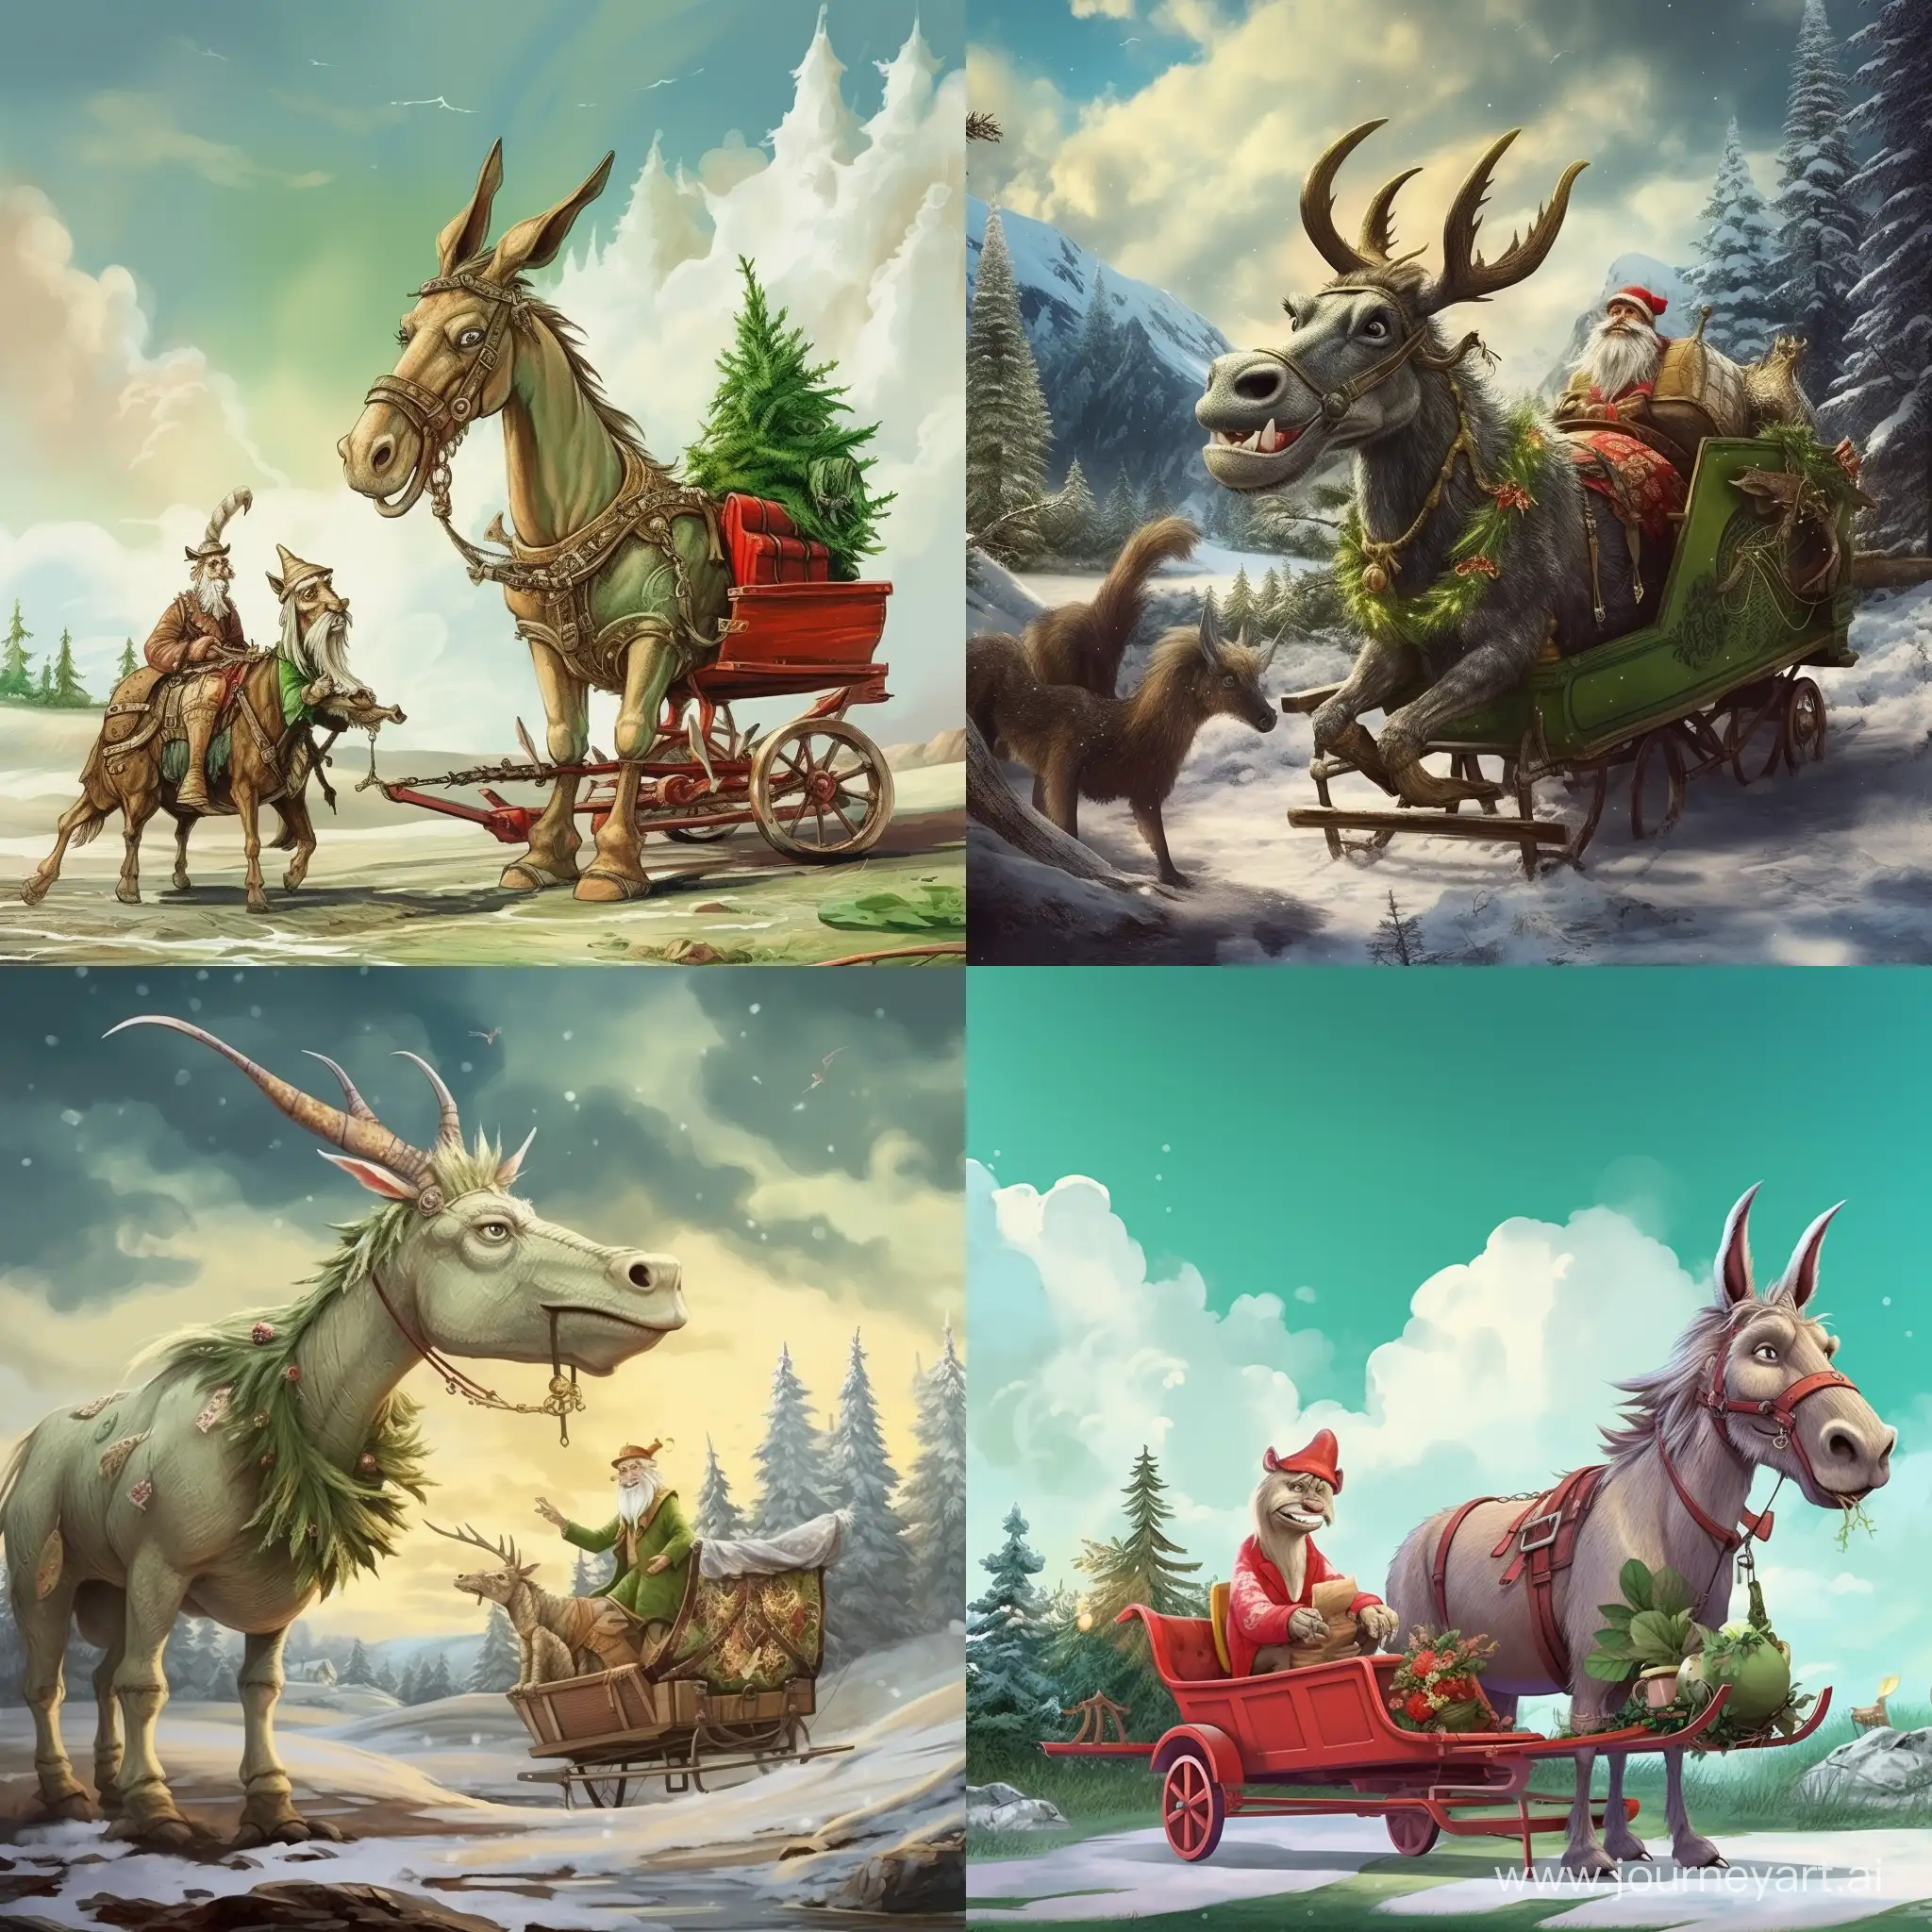 a donkey with deer antlers drags a cart on which Santa Claus sits with gifts. A large green dragon flies in the sky. Weather without snow.